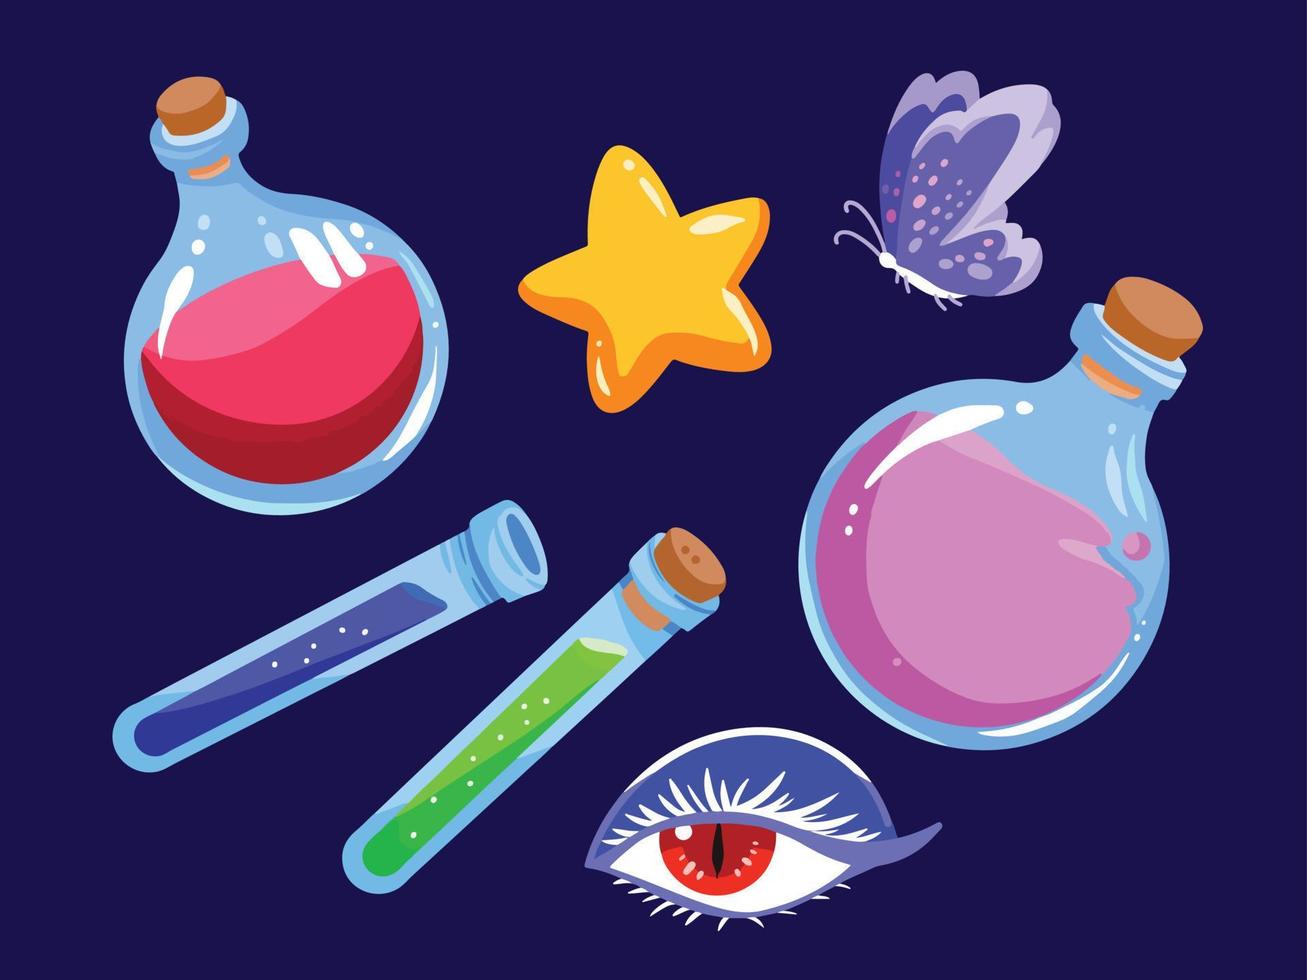 Magic, potion, and witch craft fantasy themed vector illustration set. Potion bottles, star, eye, and butterfly drawing with cartoon flat art style and color.